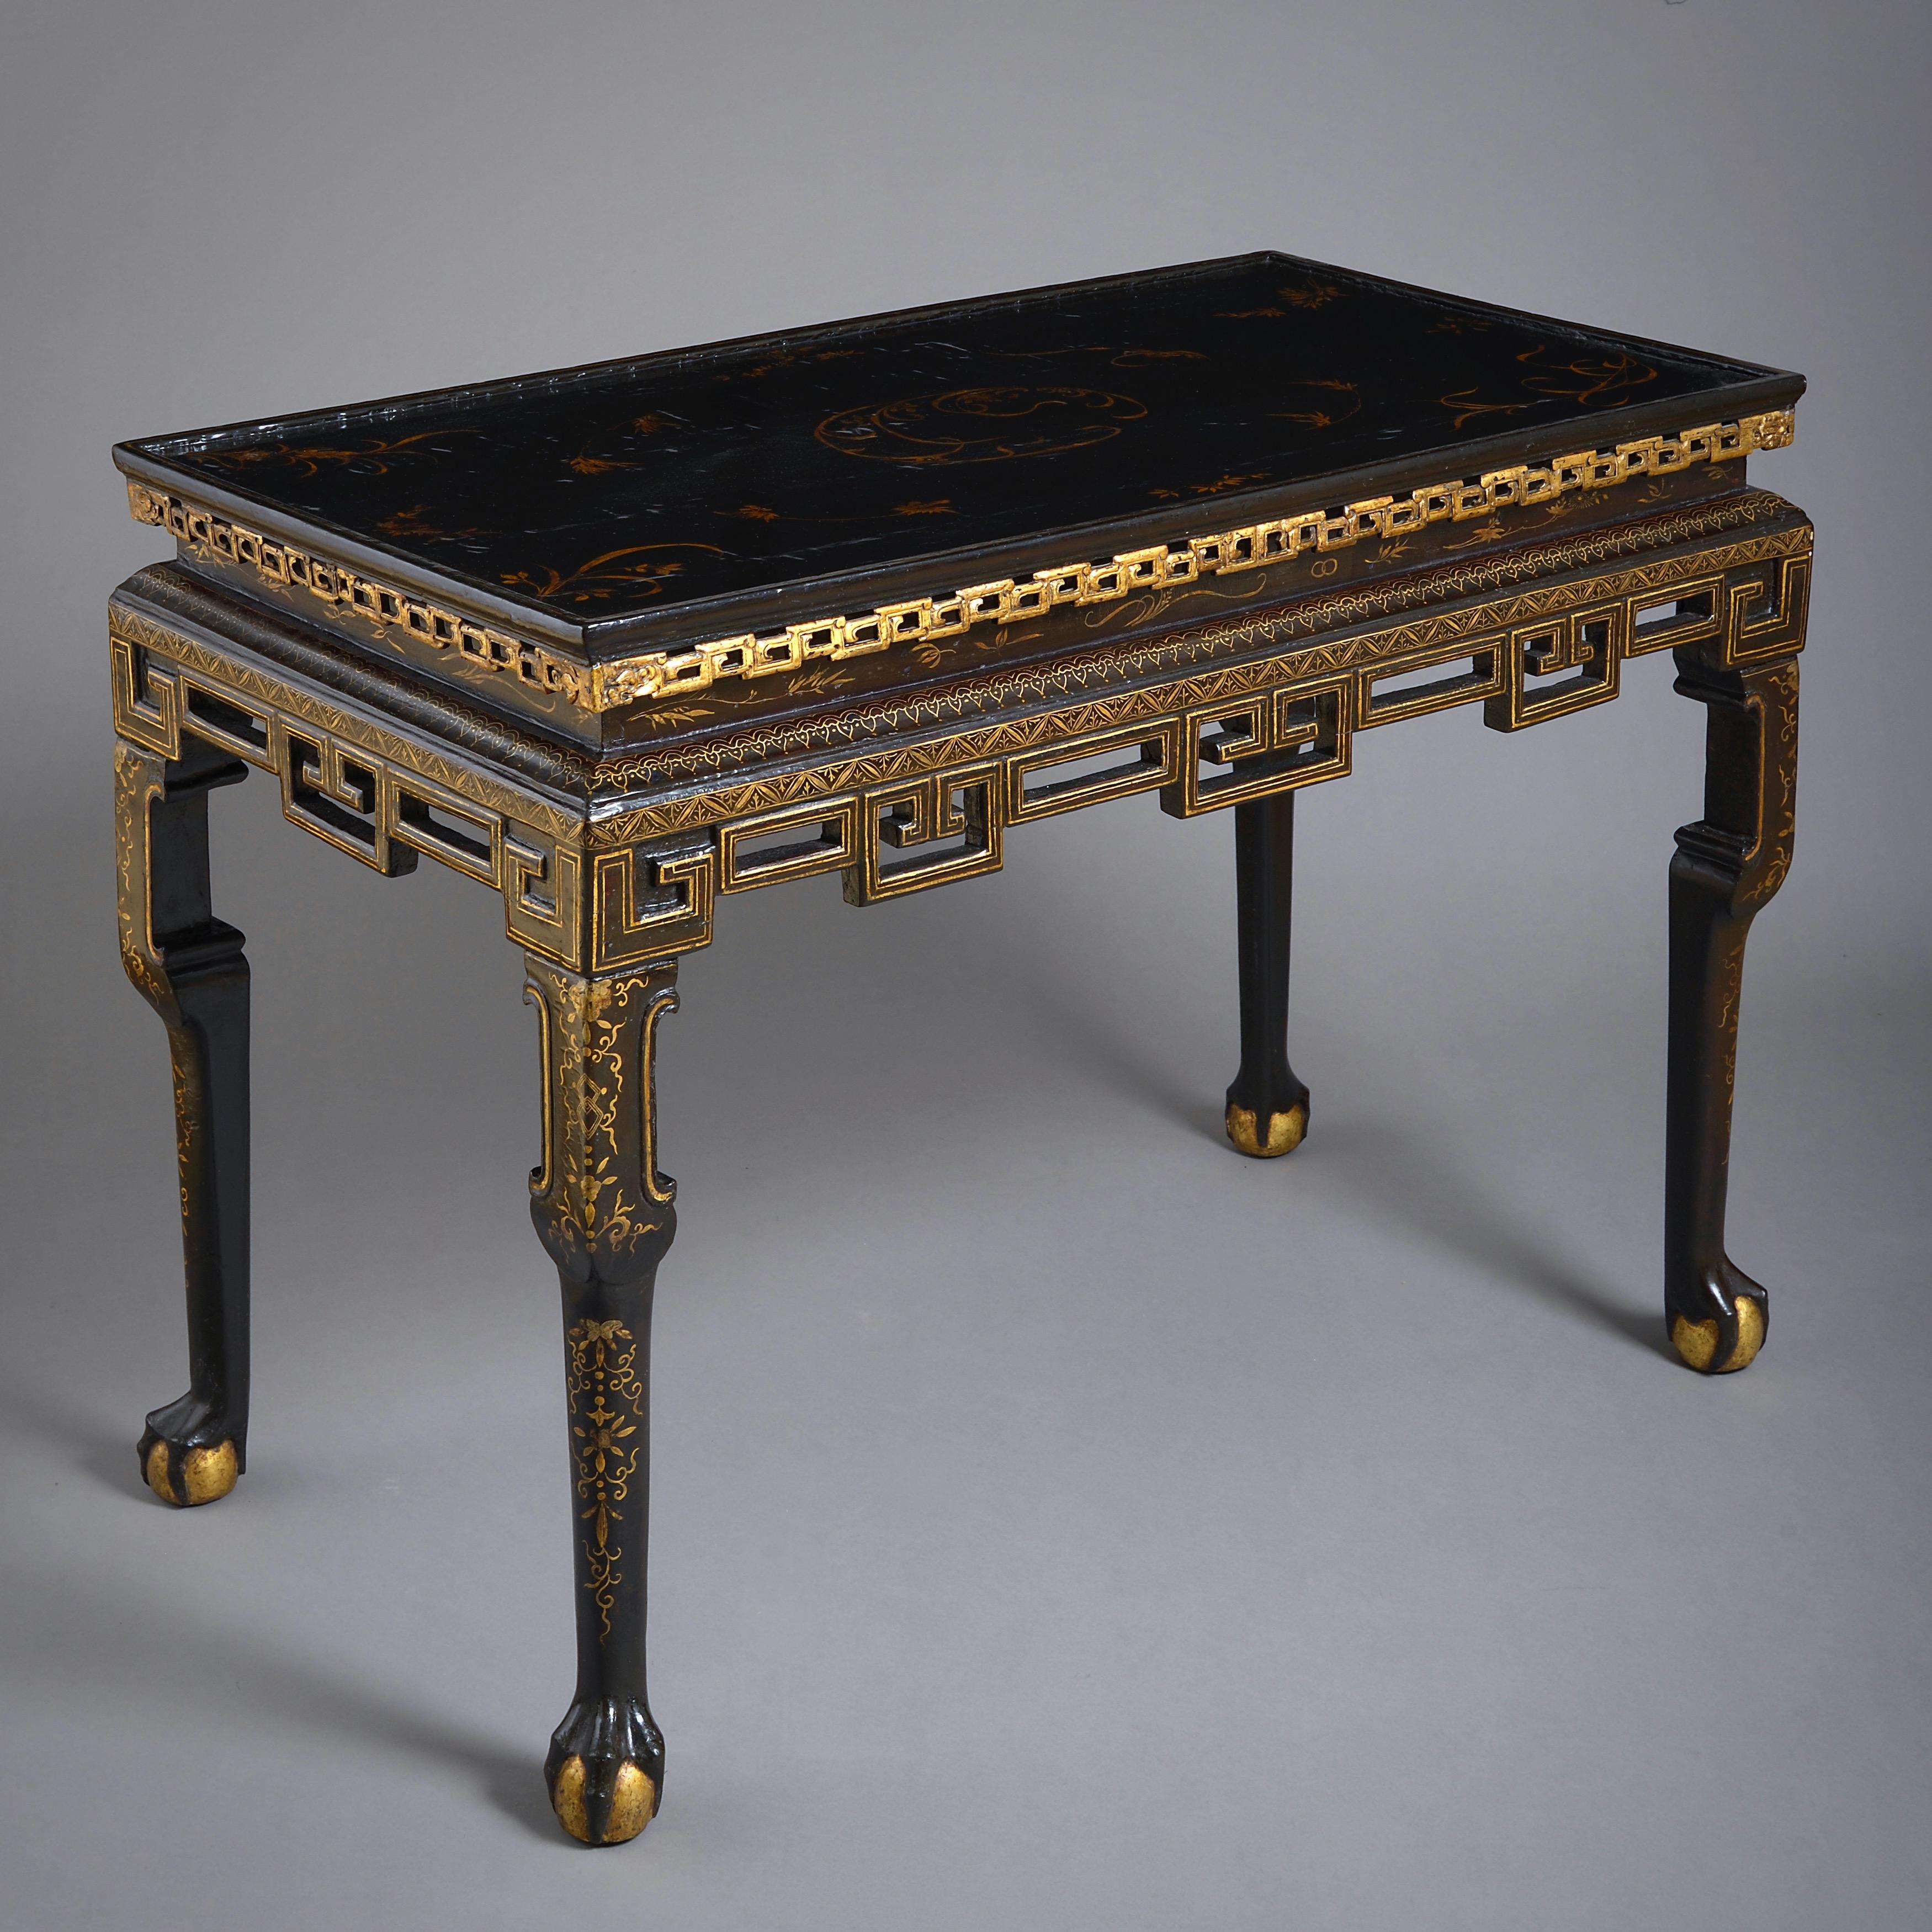 A rare Chinese export lacquer table, late 18th century.

Decorated in gilt on a black ground.

Measures: H 74cm x W 100cm x D 55cm

H 29